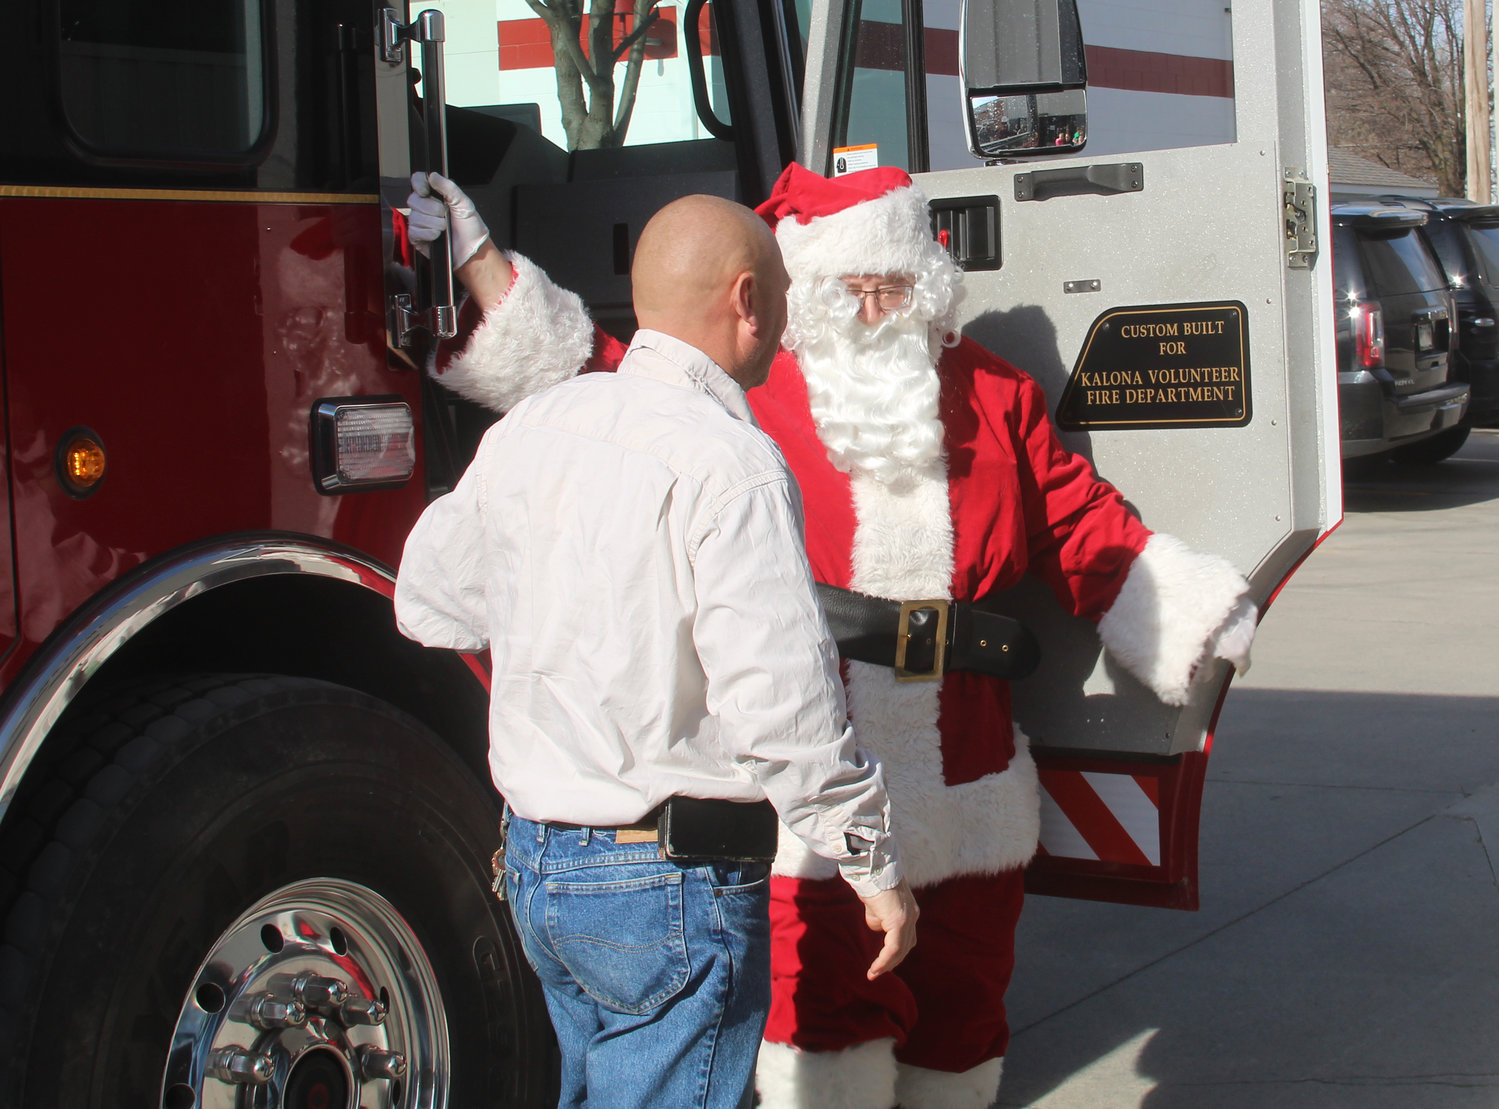 Santa Claus arrives at the Kalona Community Center by firetruck on Dec. 7.